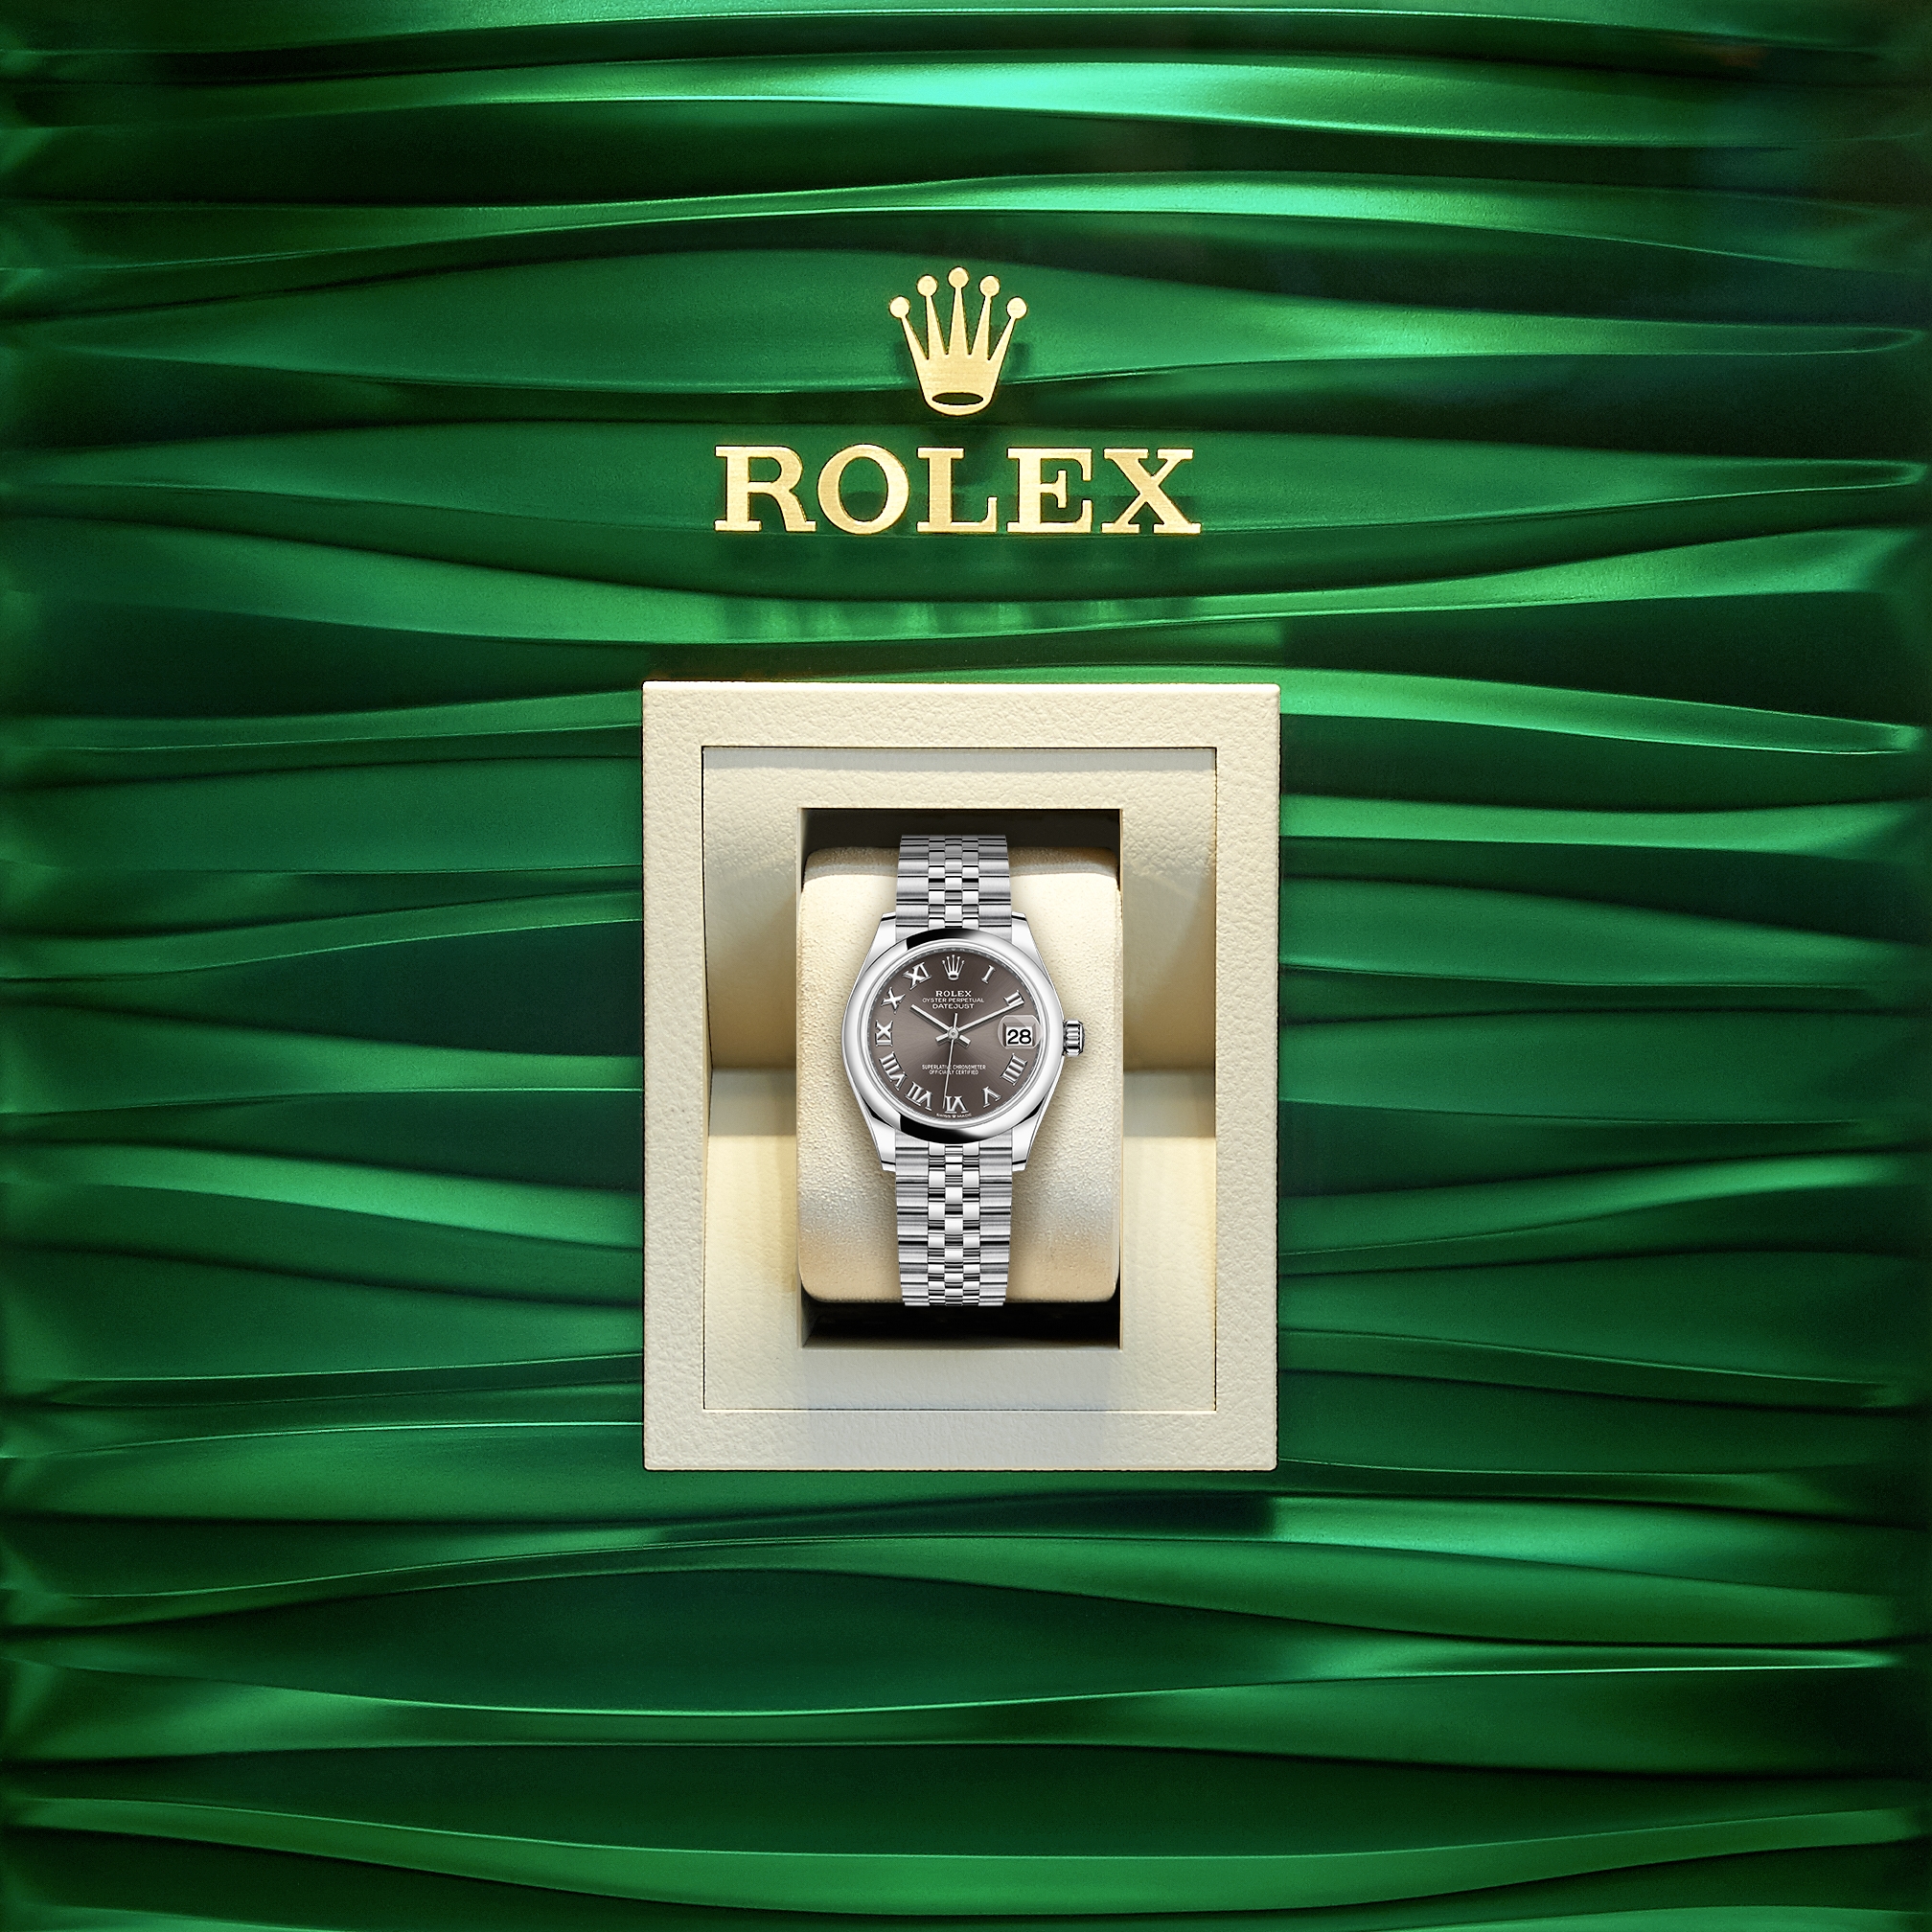 Rolex Ladies Rolex 26mm Datejust White MOP Mother Of Pearl Roman Numeral DialRolex Ladies Rolex Date Pre-owned Watch 69160 Silver Stick Dial